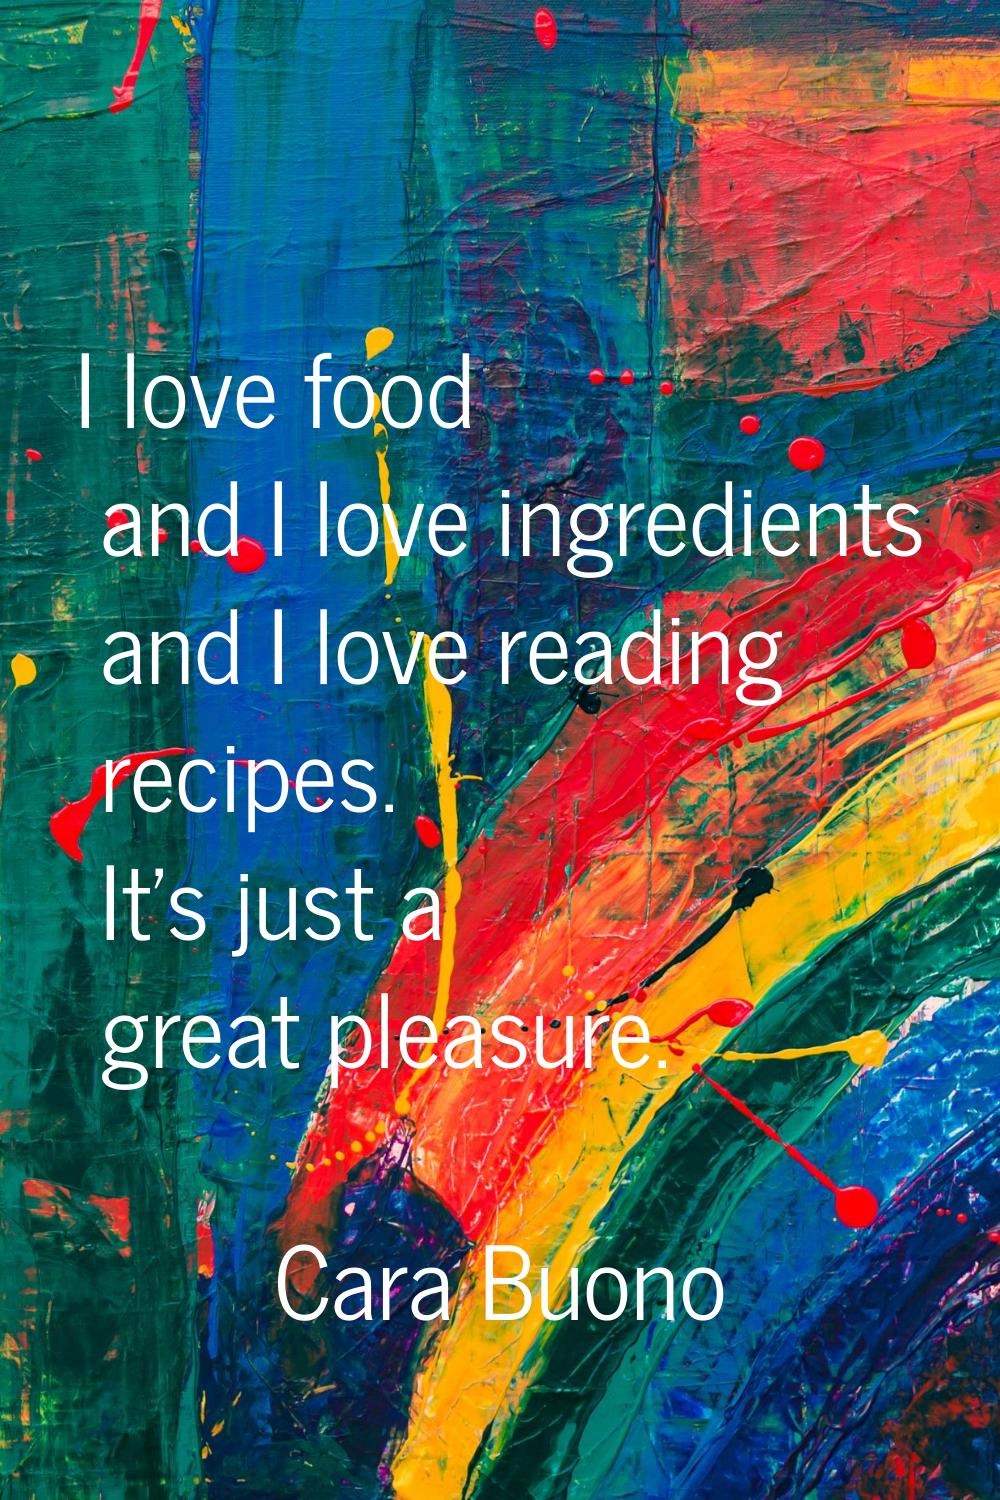 I love food and I love ingredients and I love reading recipes. It's just a great pleasure.